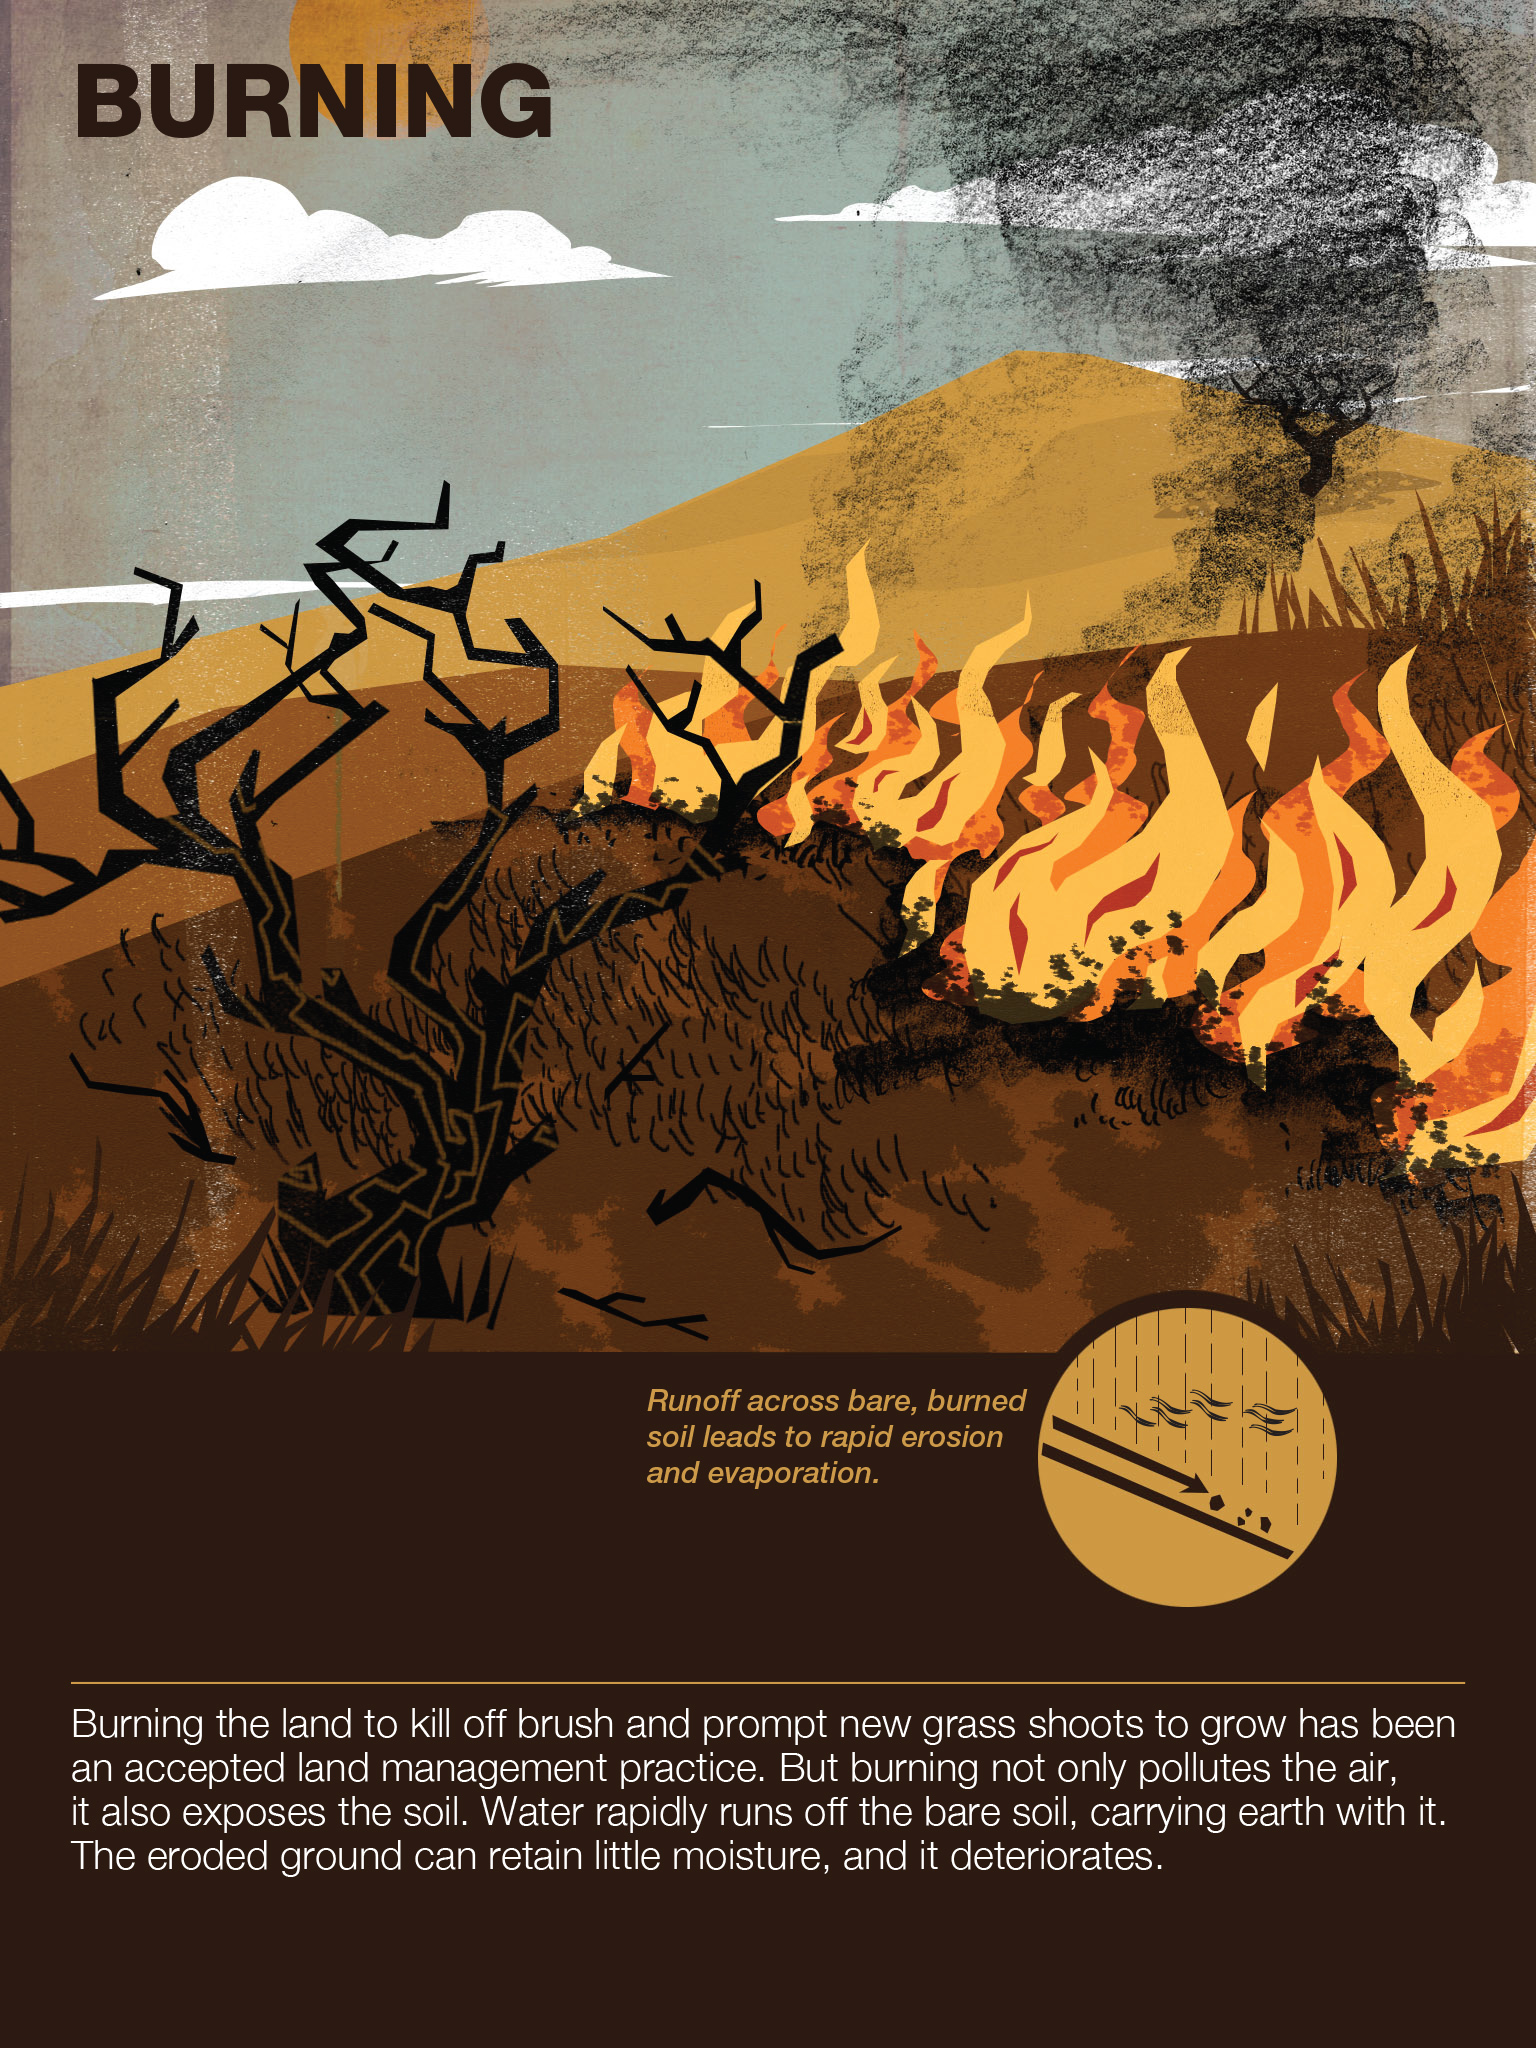 Burning. A widely-accepted land management strategy, this graphic hints why it may not be so good after all.